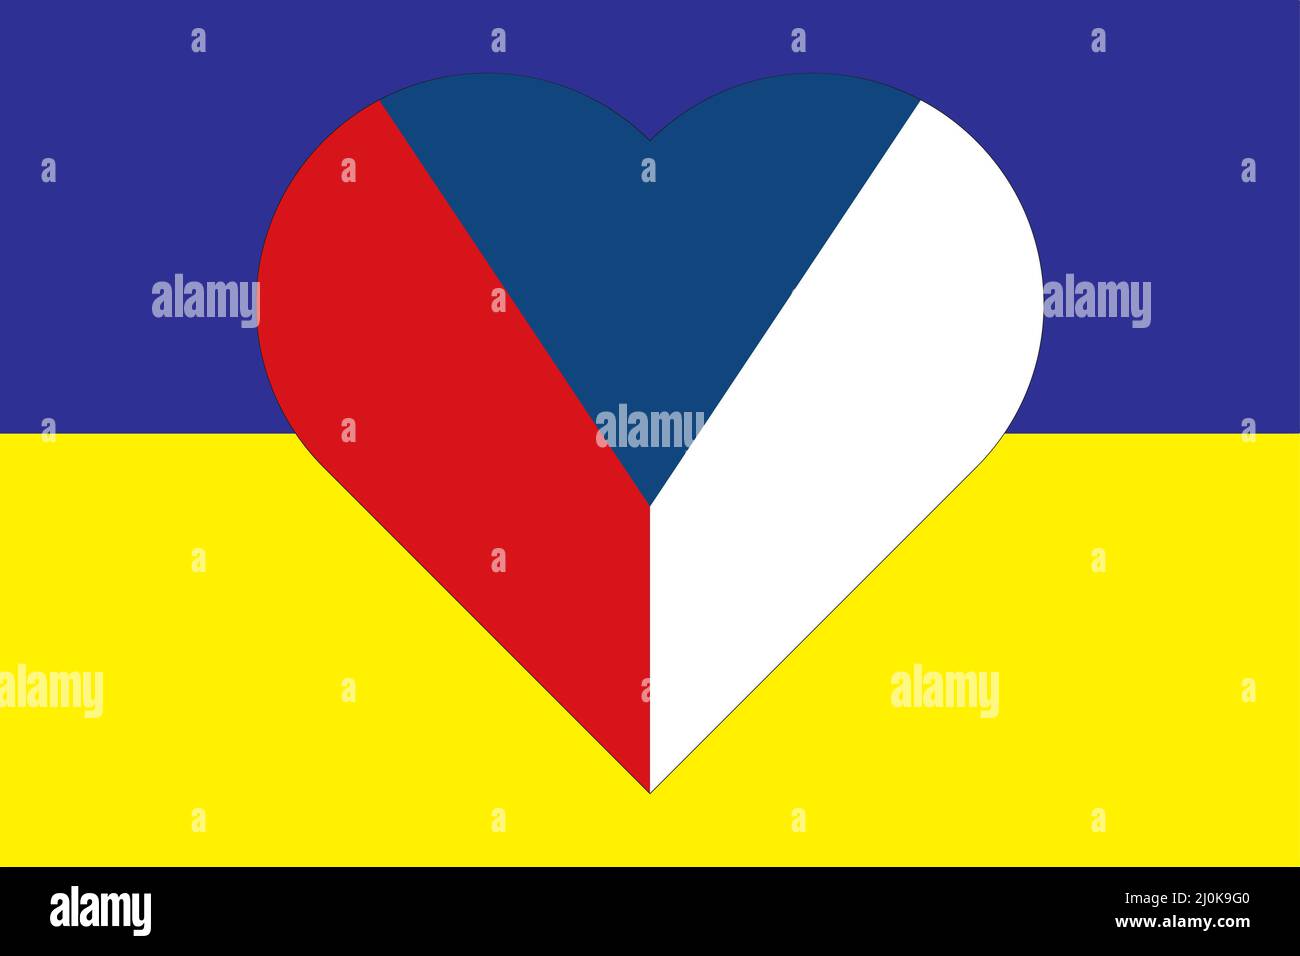 Heart painted in the colors of the flag of Czech republic on the flag of Ukraine. Illustration of a heart with the national symbol of Czech republic o Stock Photo